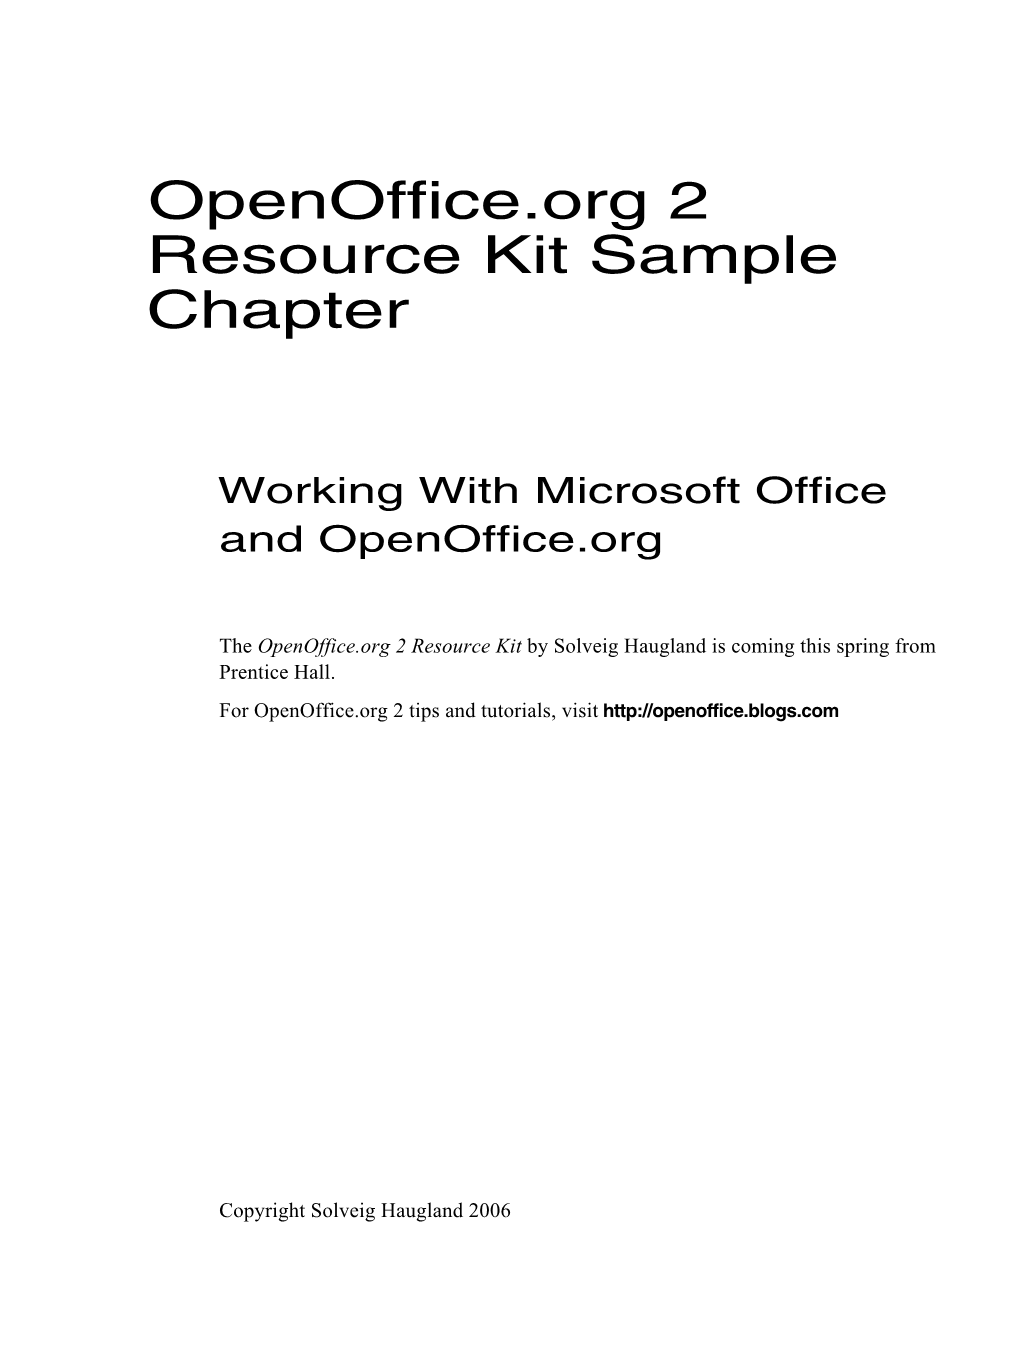 Working with Microsoft Office and Openoffice.Org